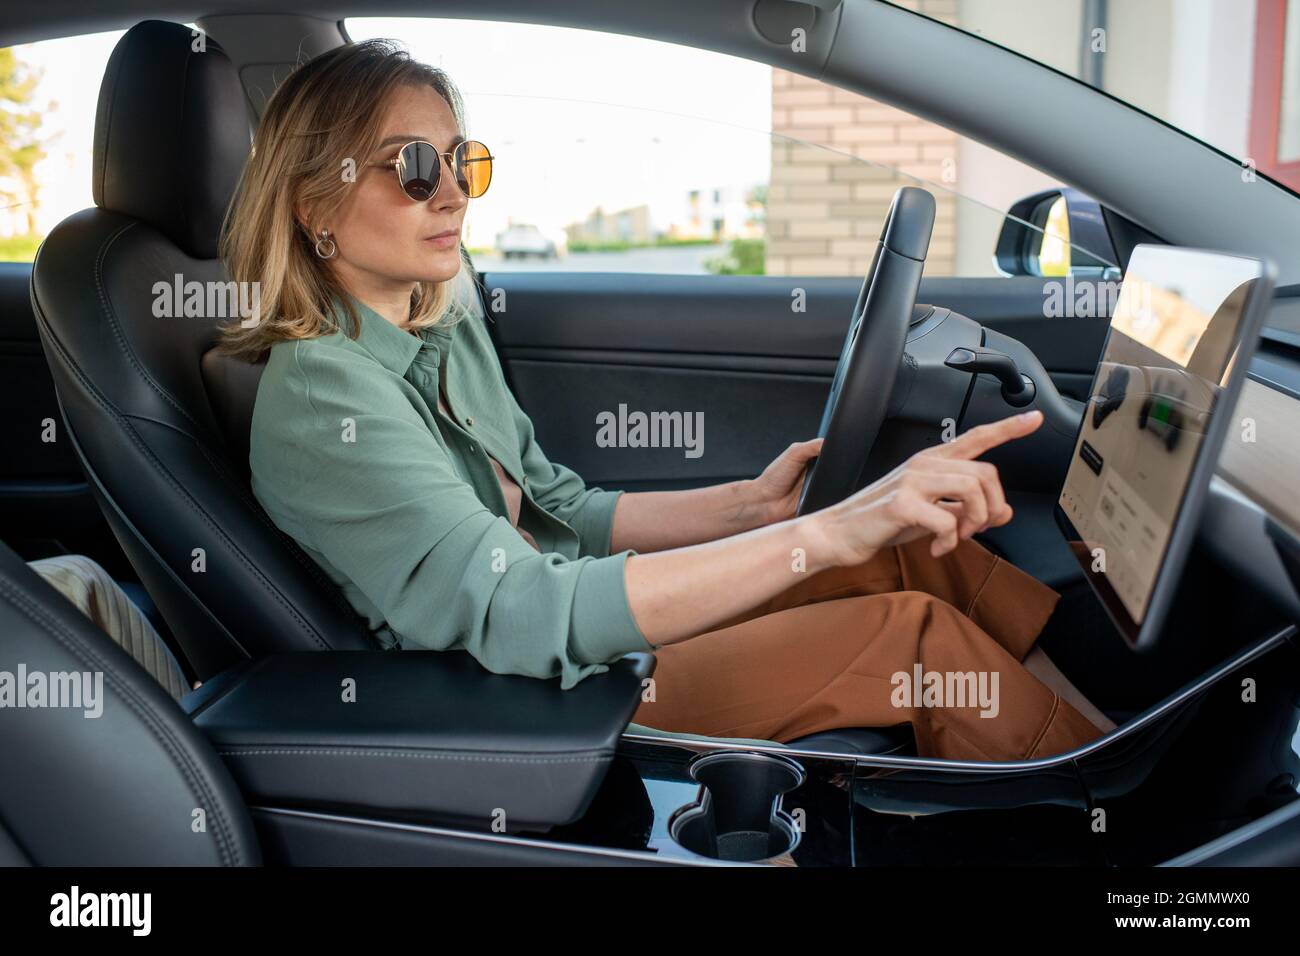 Young female driver sitting in car and pointing at display while choosing destination place Stock Photo